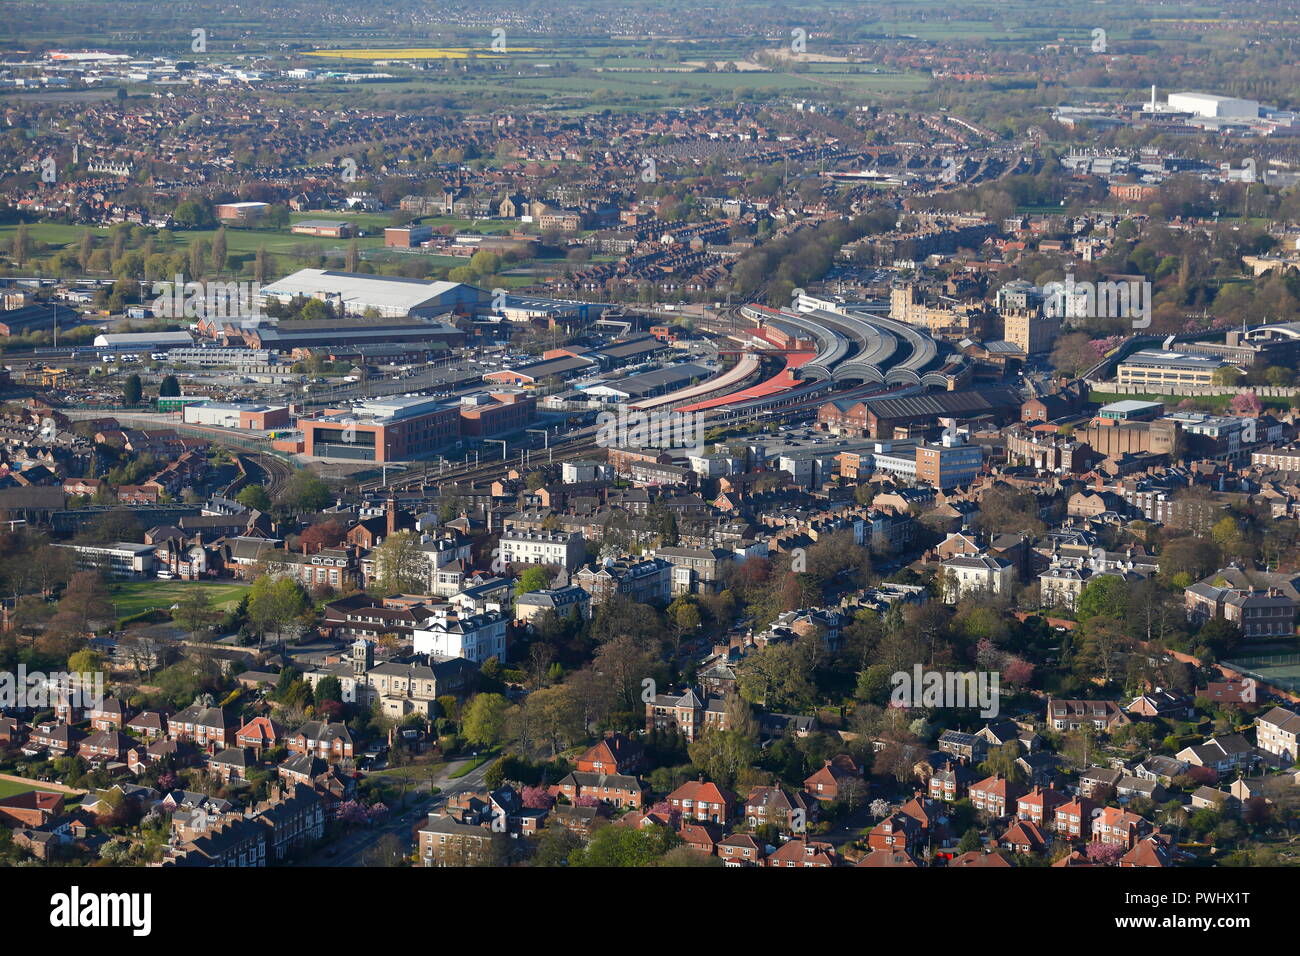 A view across York with York Railway Station pictured centre. Stock Photo